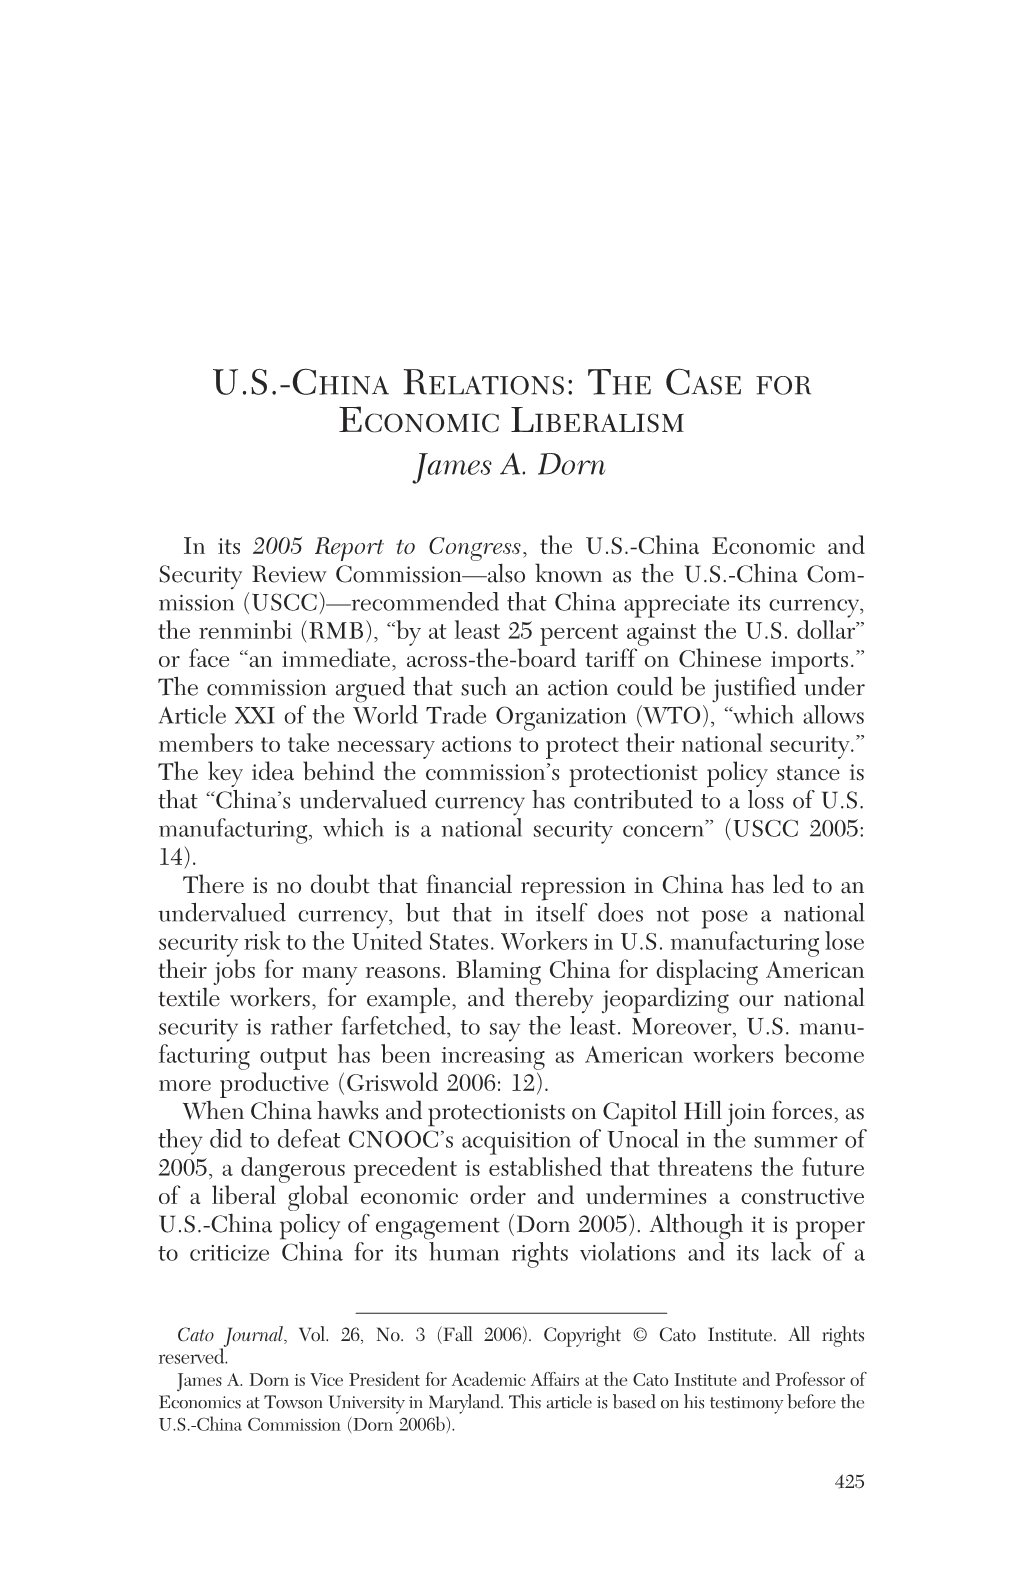 U.S.-China Relations: the Case for Economic Liberalism